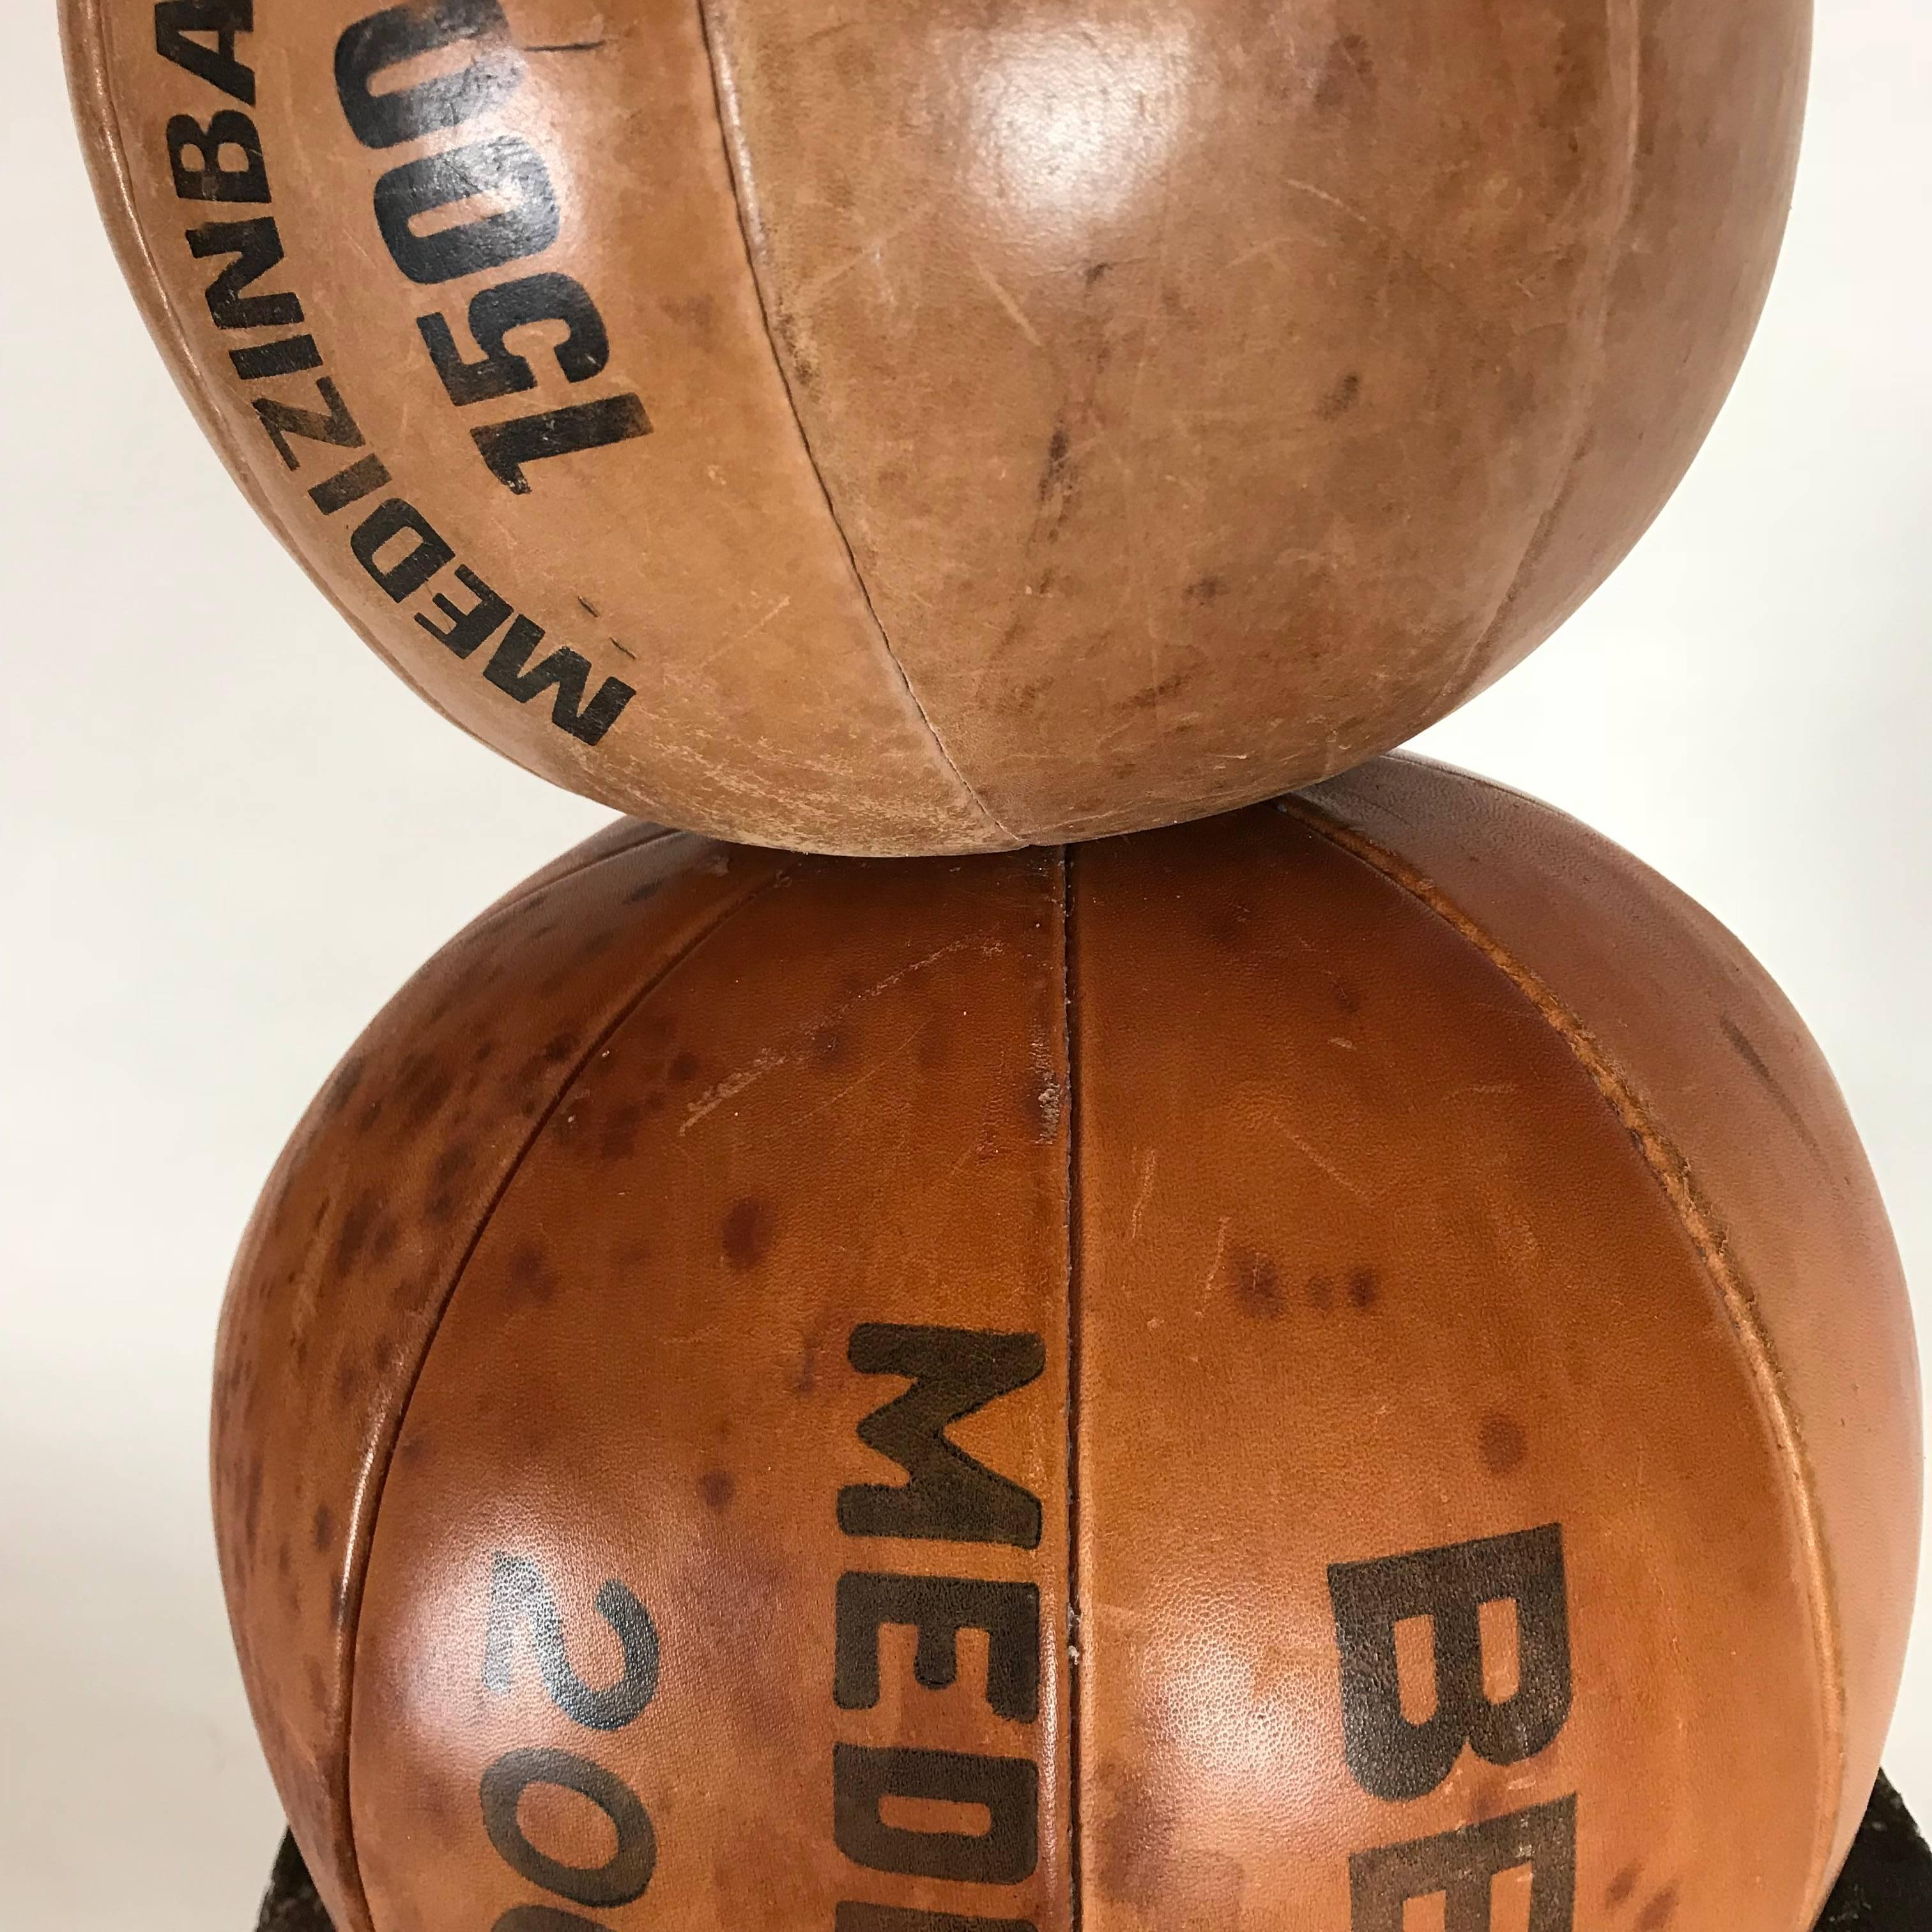 Hand-Crafted Three Vintage Leather Medicine Balls, 1920s-1930s Germany